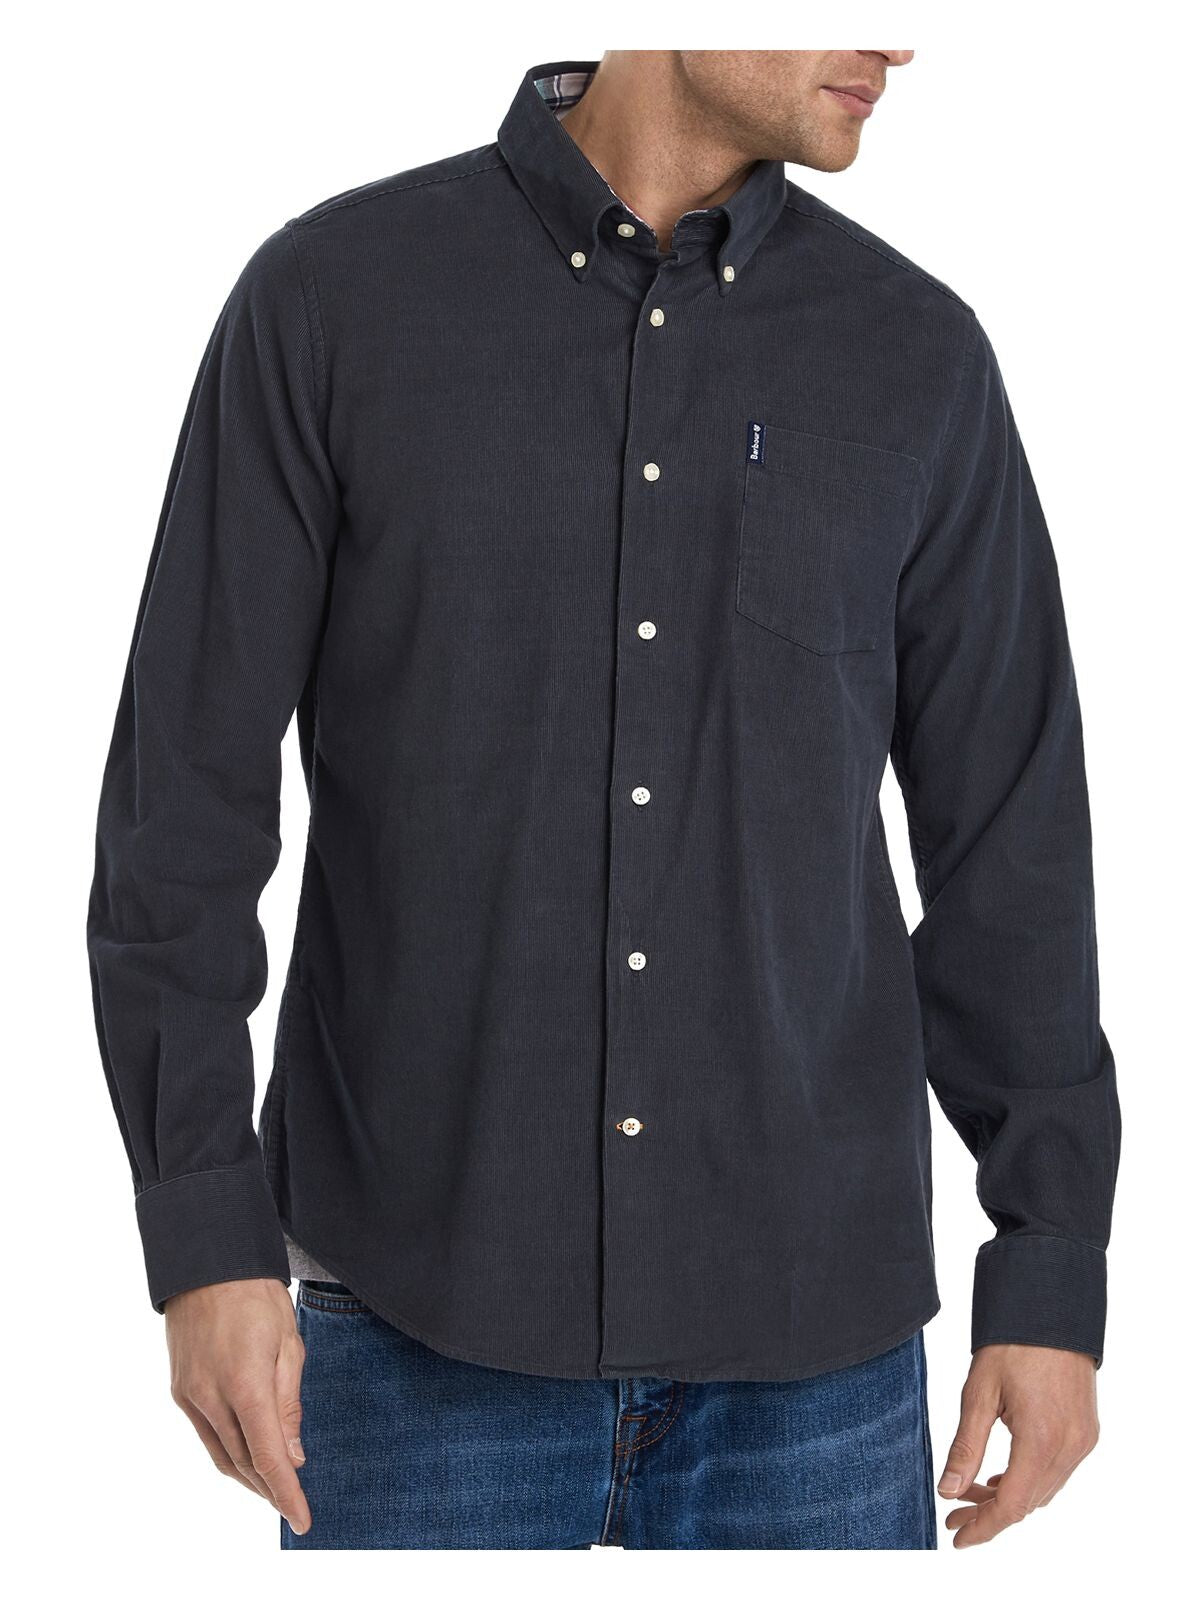 BARBOUR Mens Gray Classic Fit Button Down Cotton Casual Shirt S